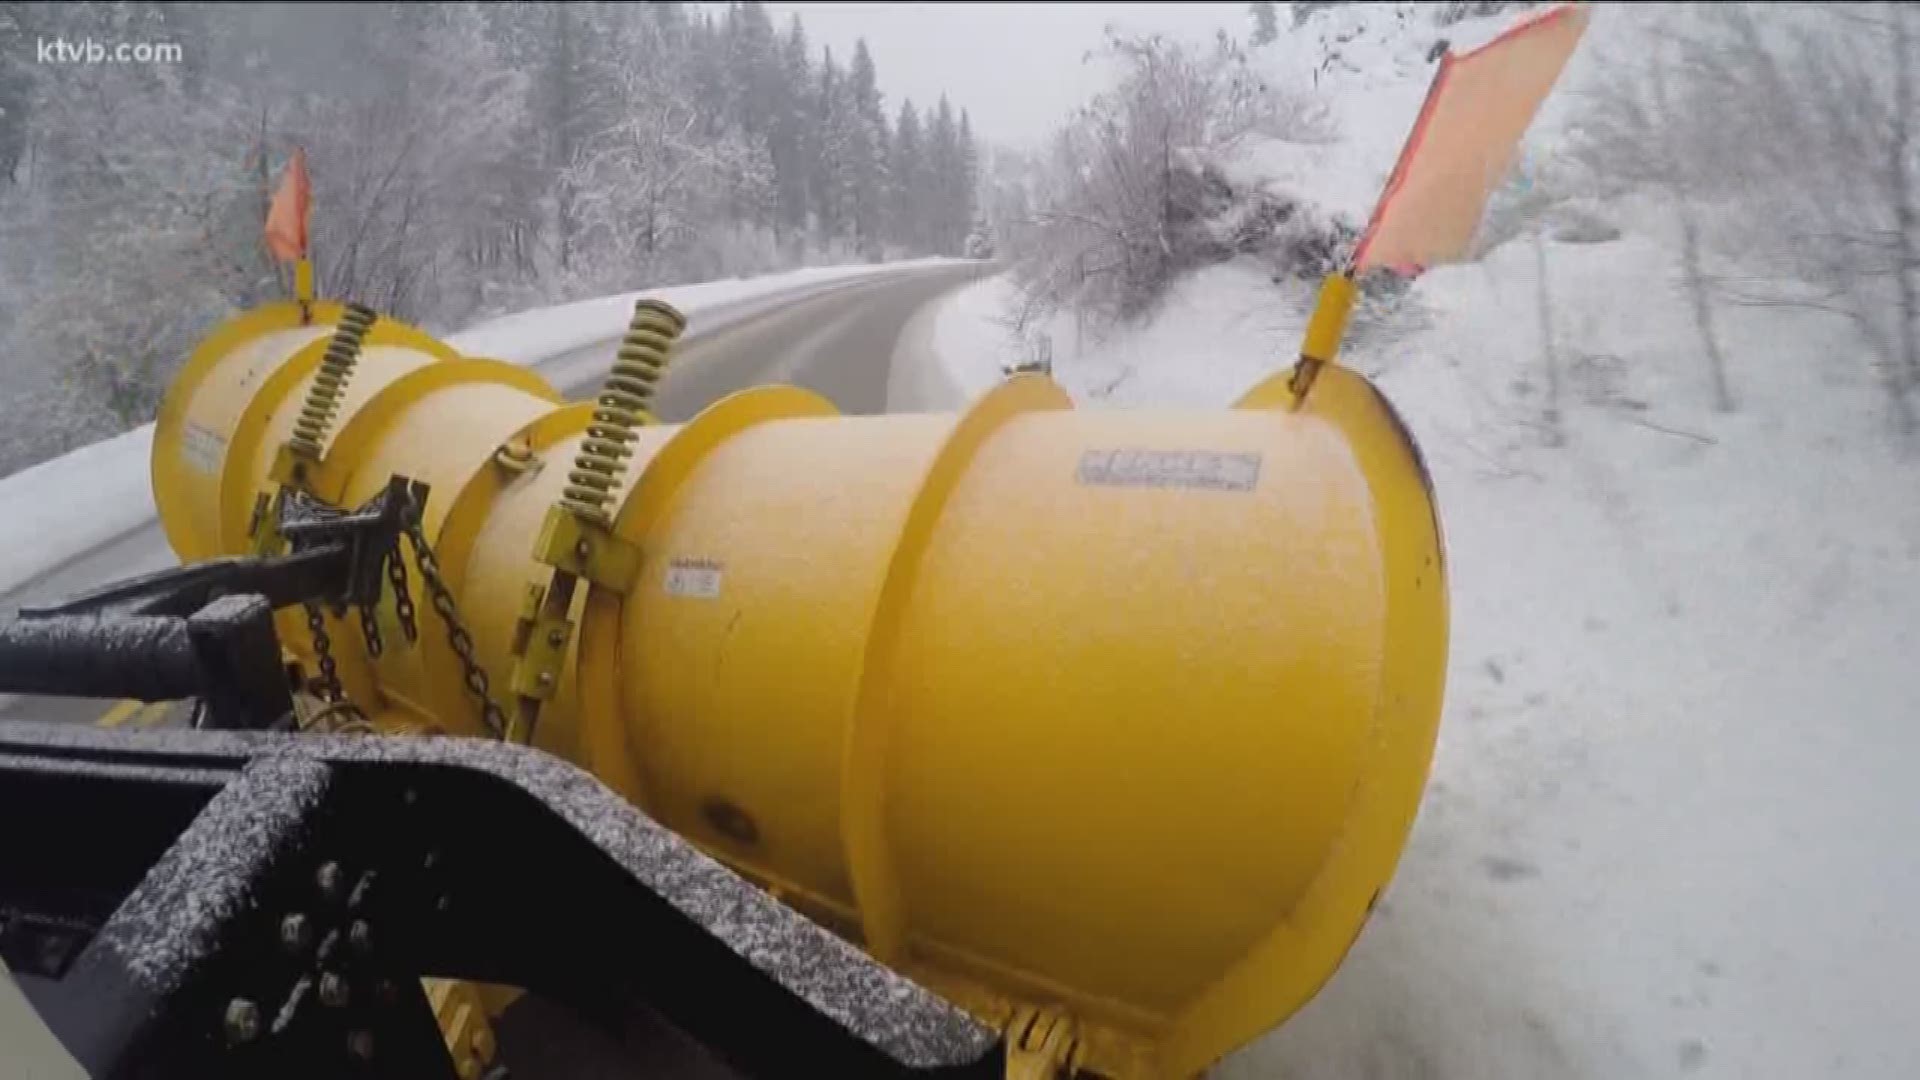 While Idaho Transportation Department shut down a long stretch of Highway 55 Monday night due to dangerous conditions for plow trucks, crews are out on other mountain roads around the state, working to keep them open.